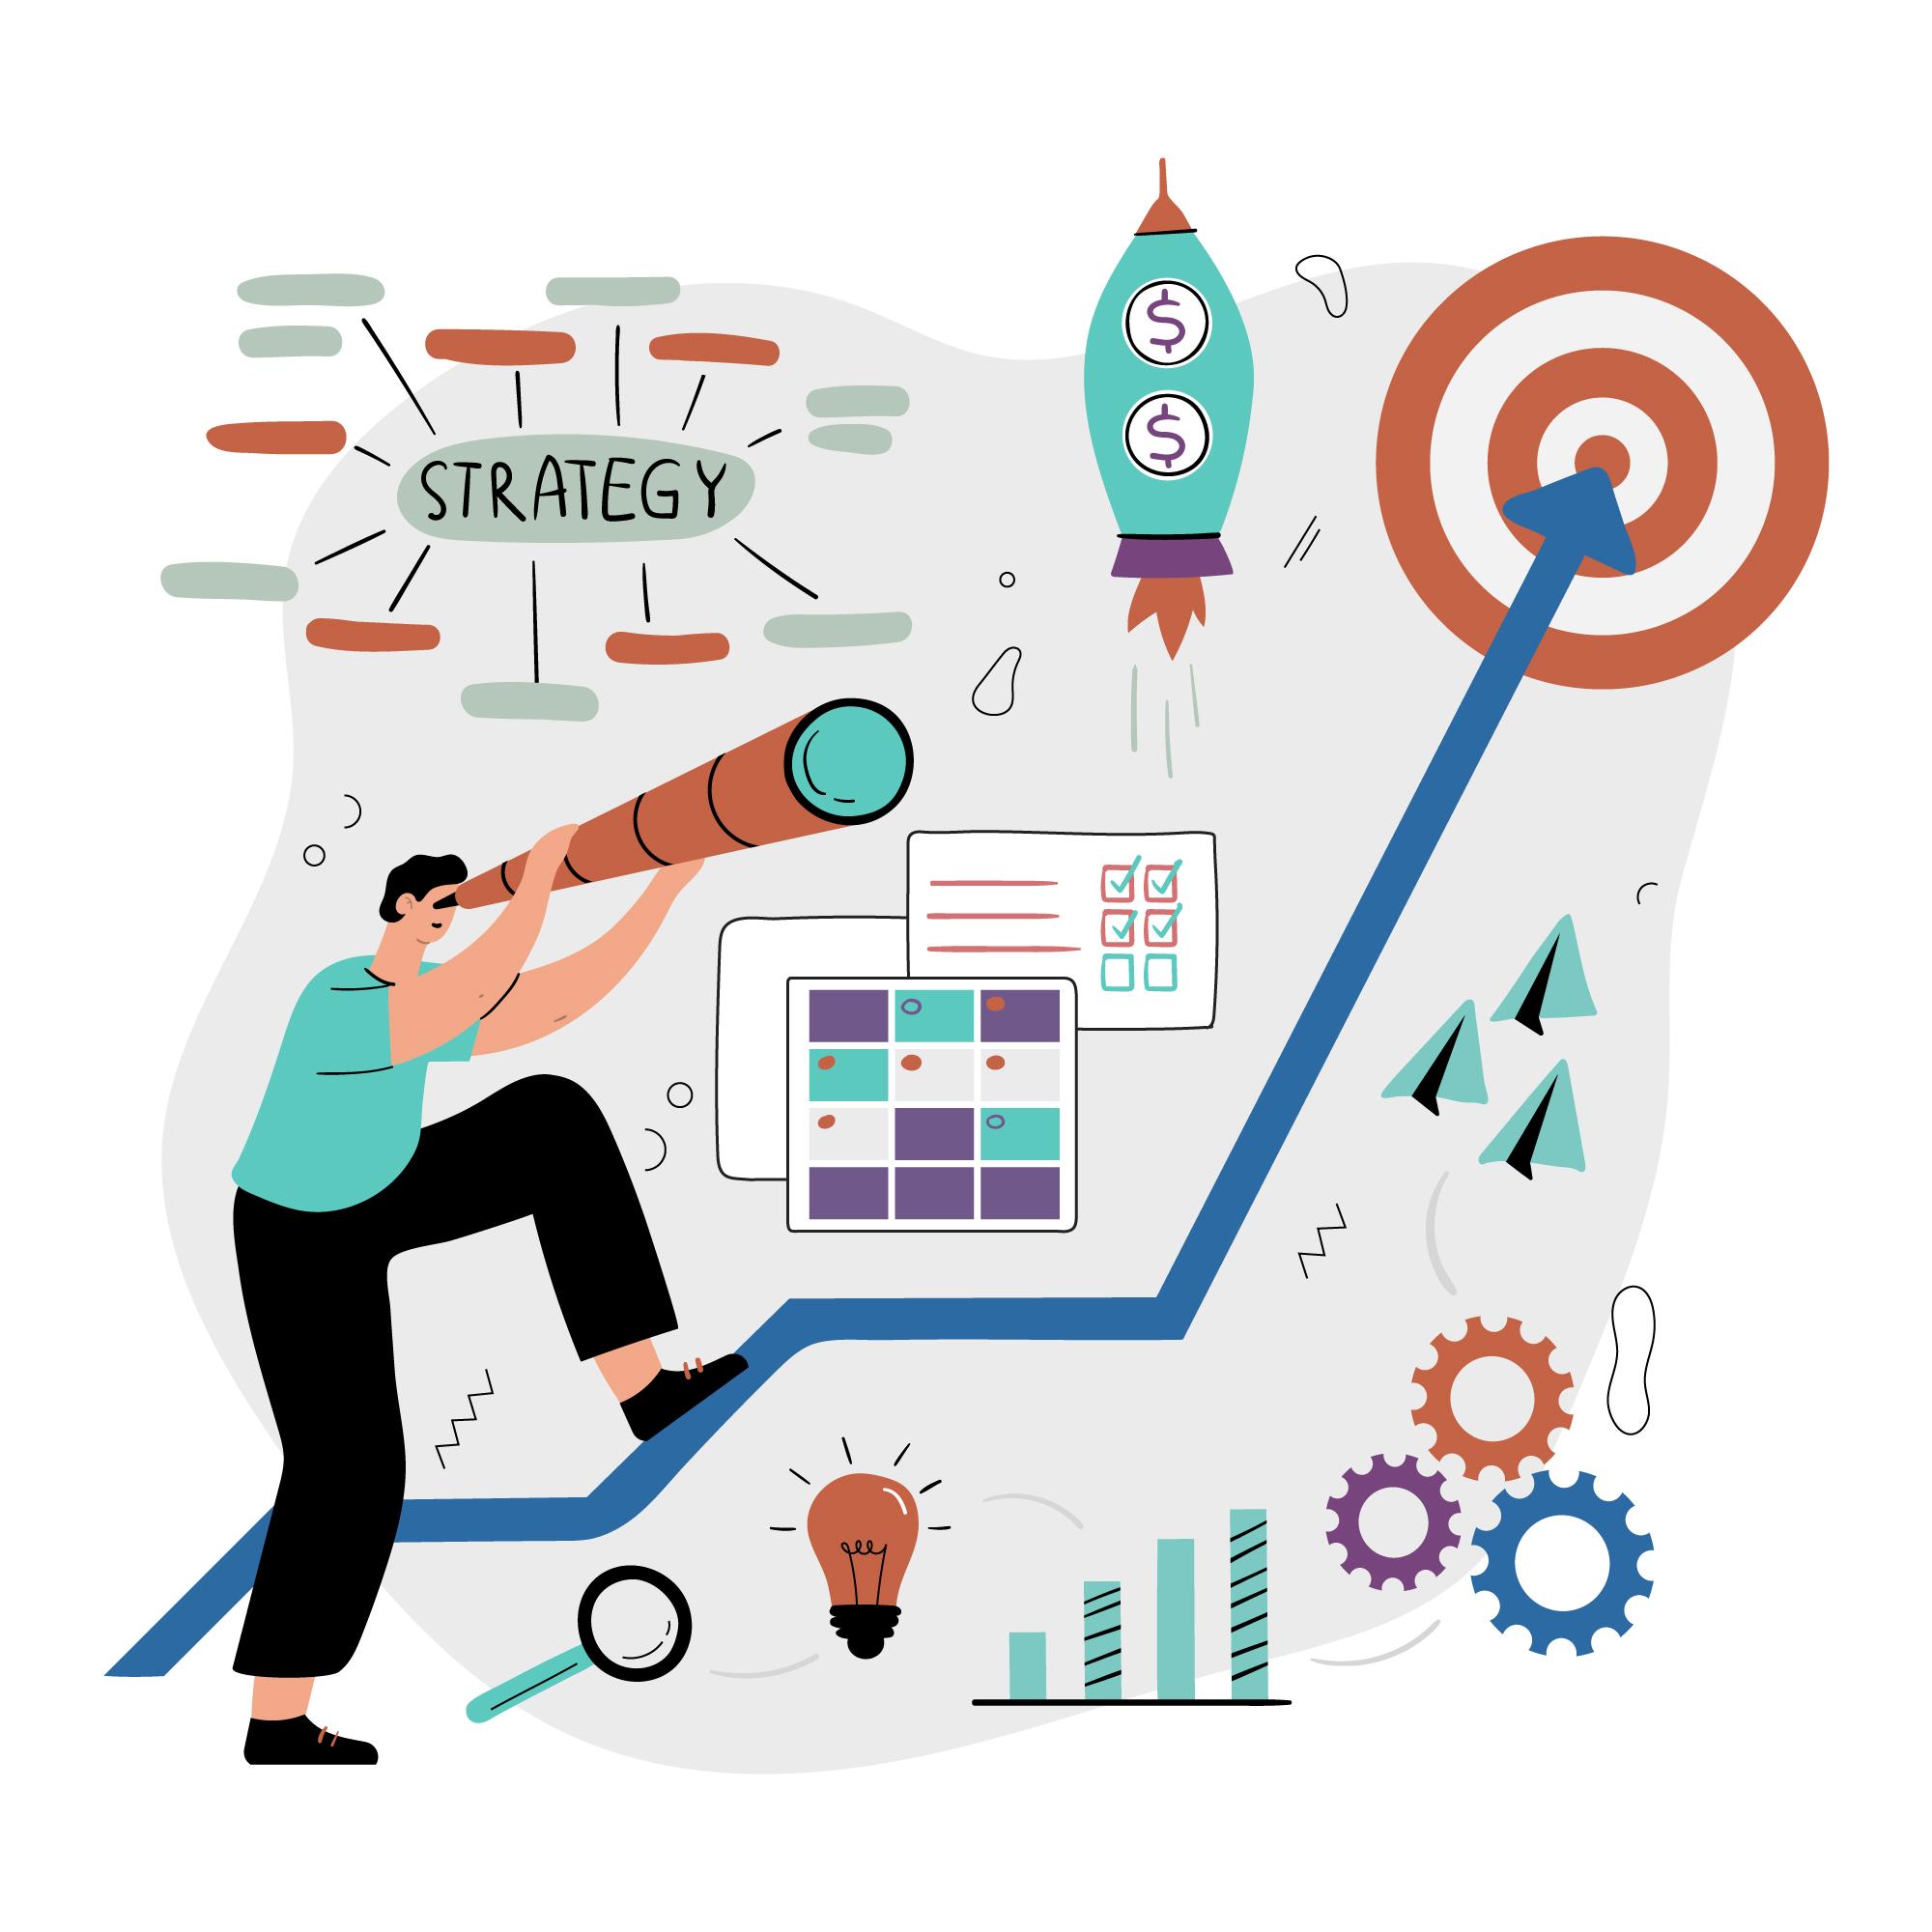 Essentials of Data Strategy to maximise Business Value